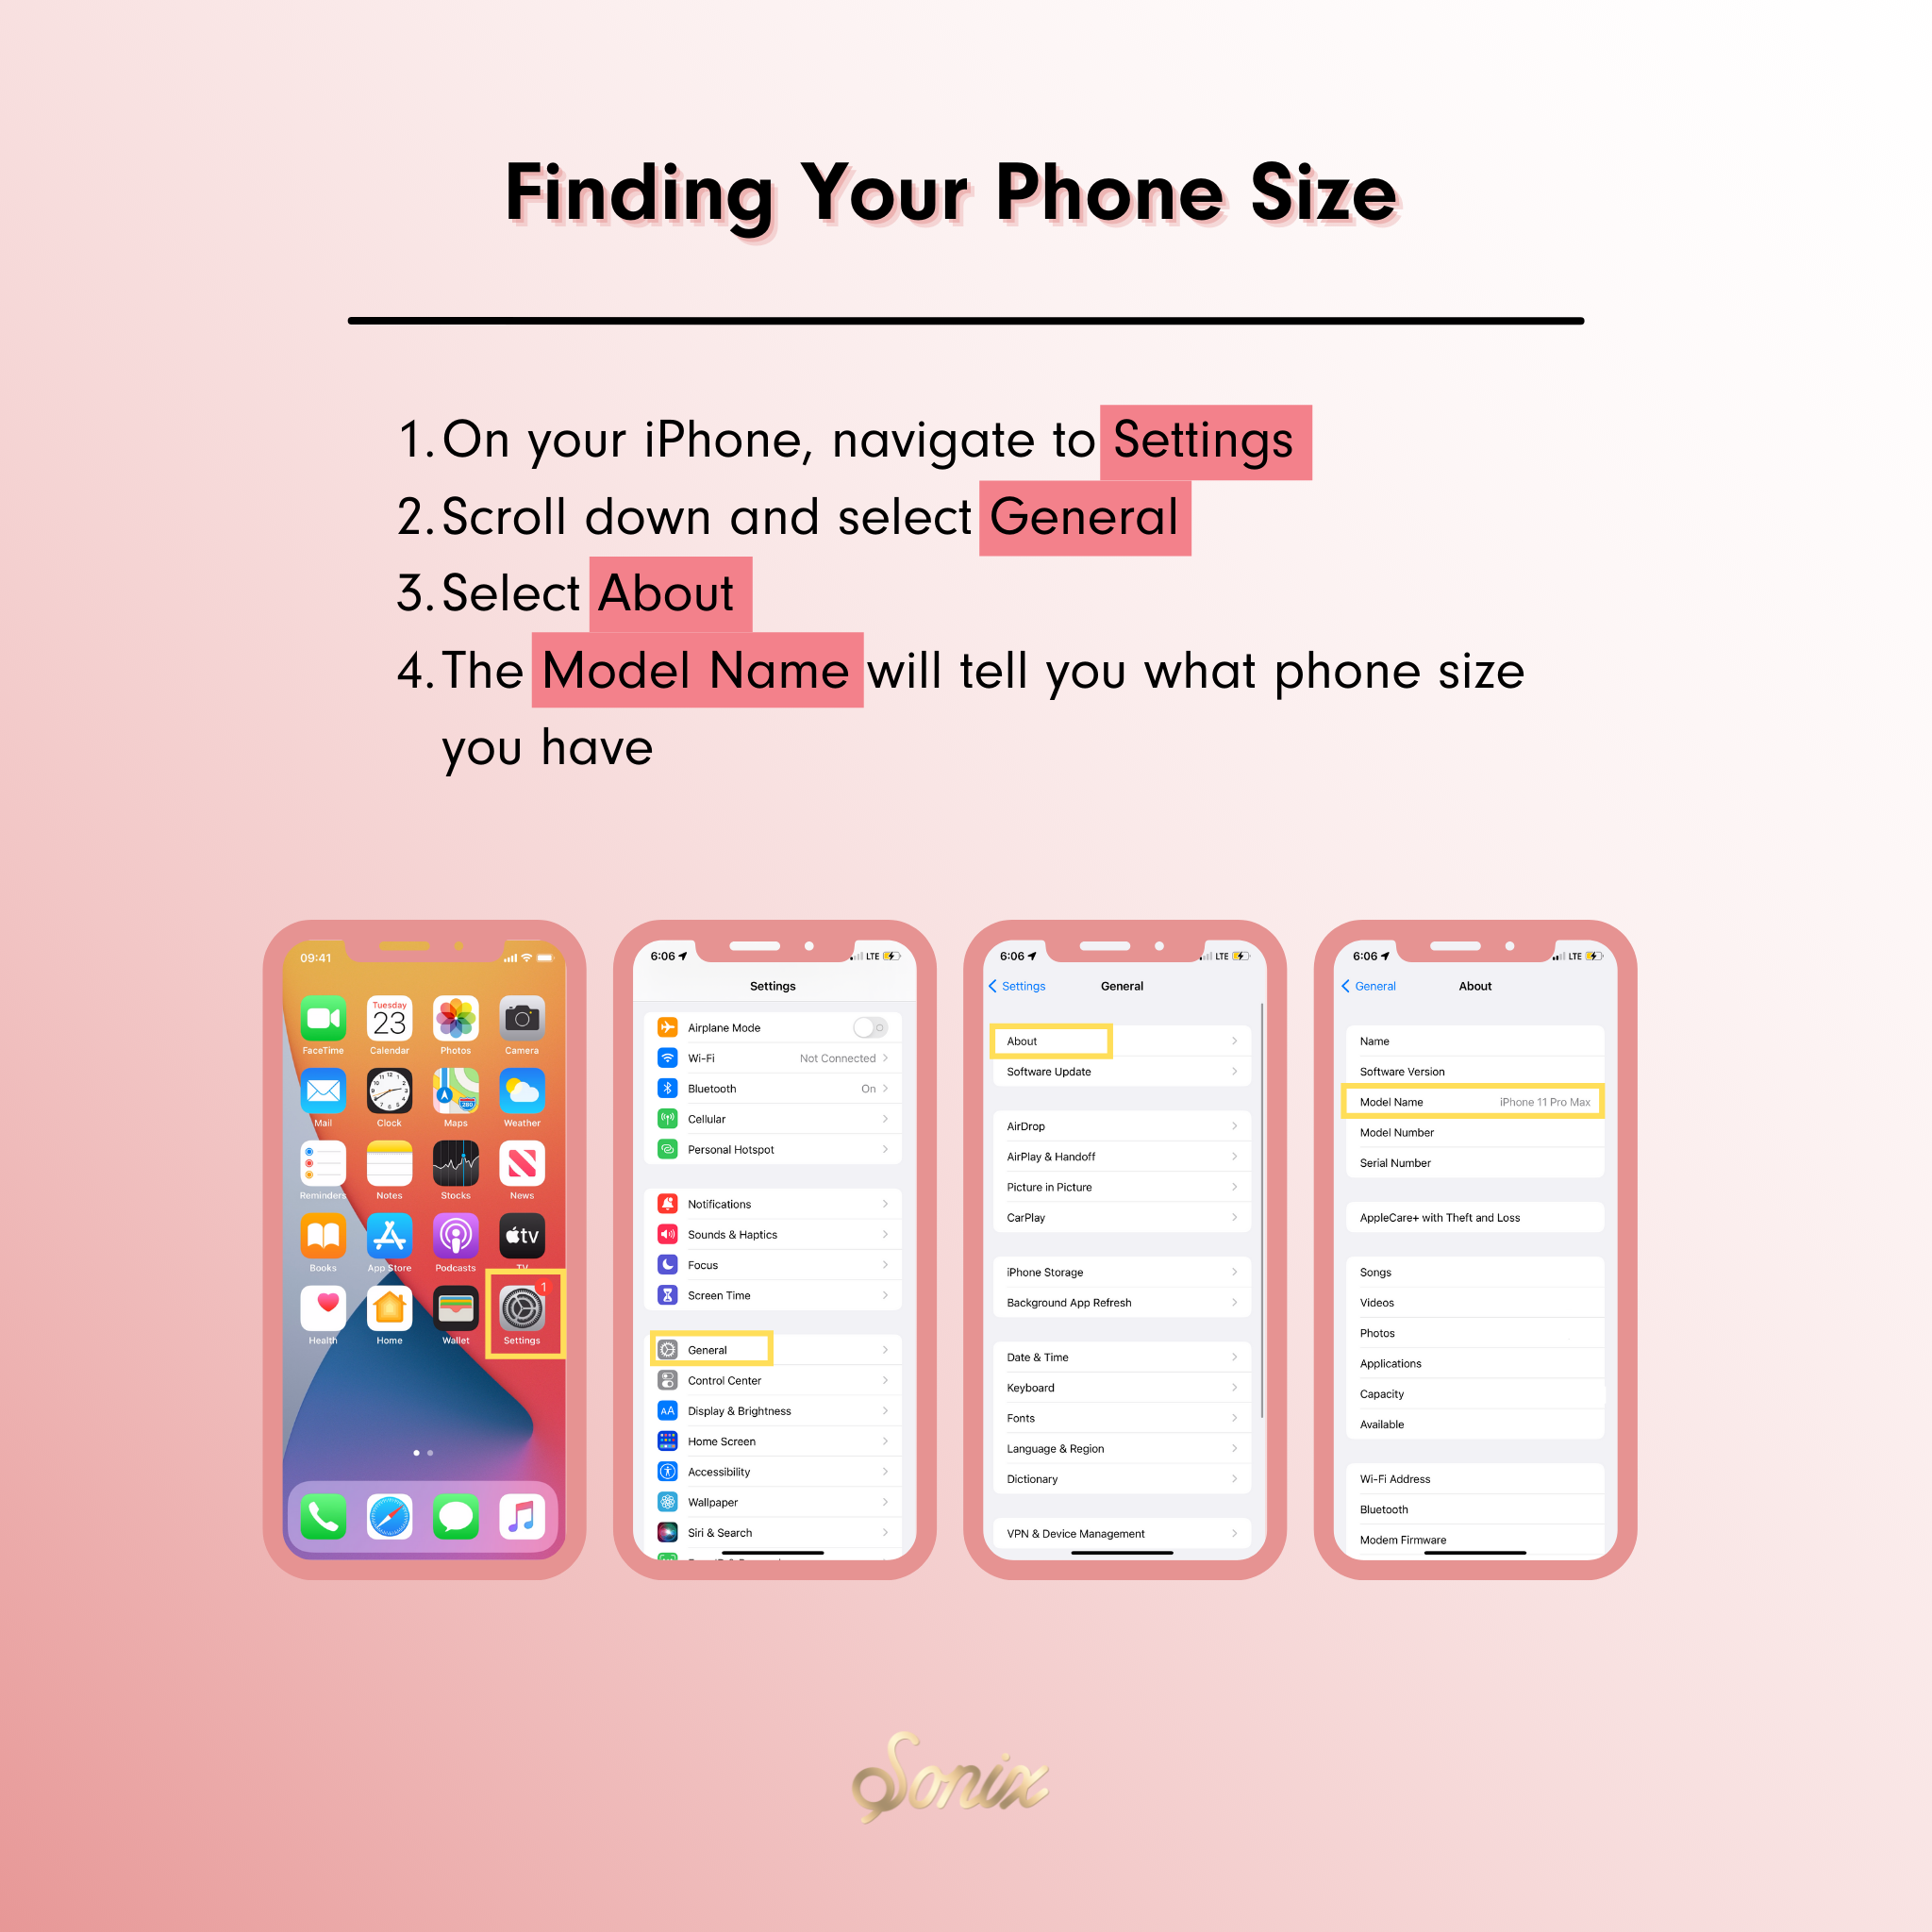 info graphic on how to find your phone size to order the correct phone case